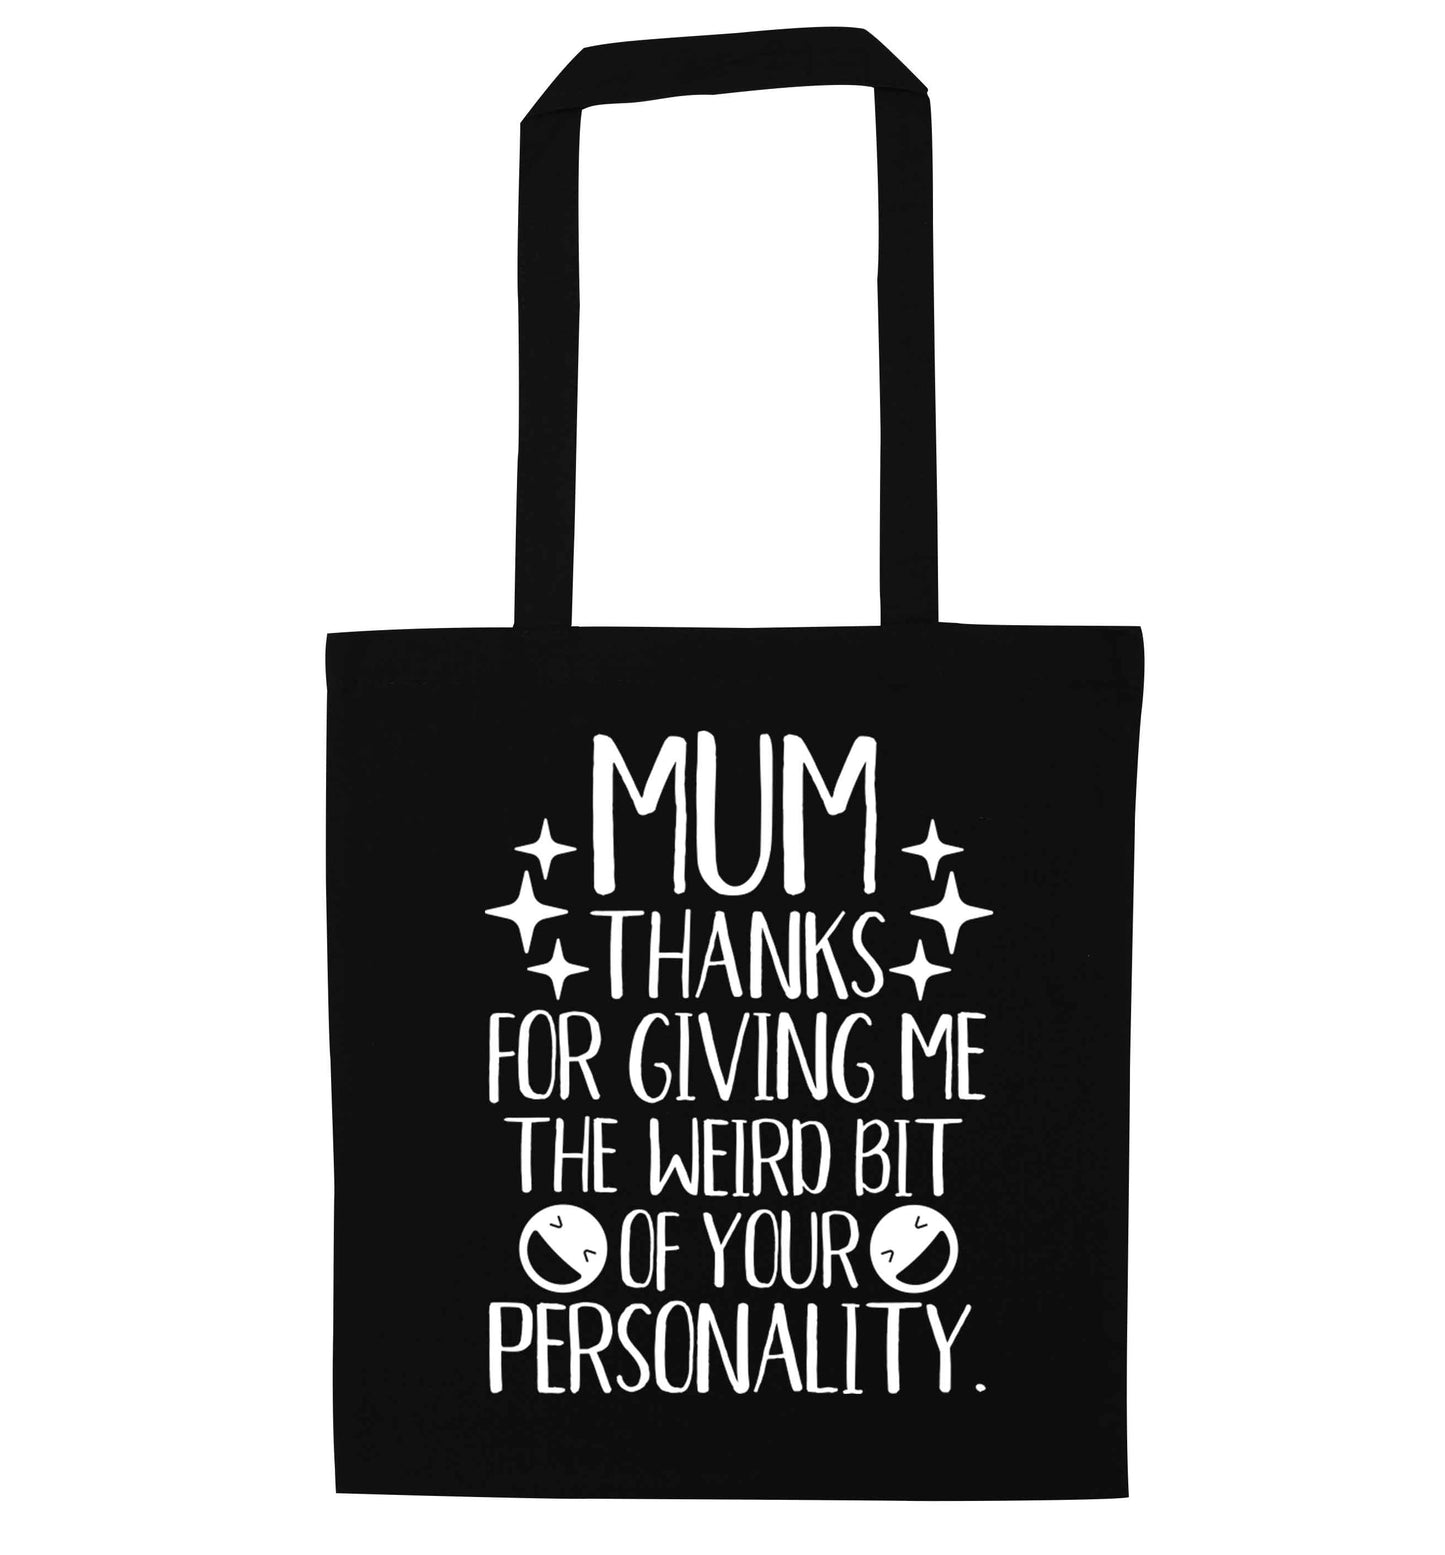 Mum, I love you more than halloumi and if you know me at all you know how deep that is black tote bag